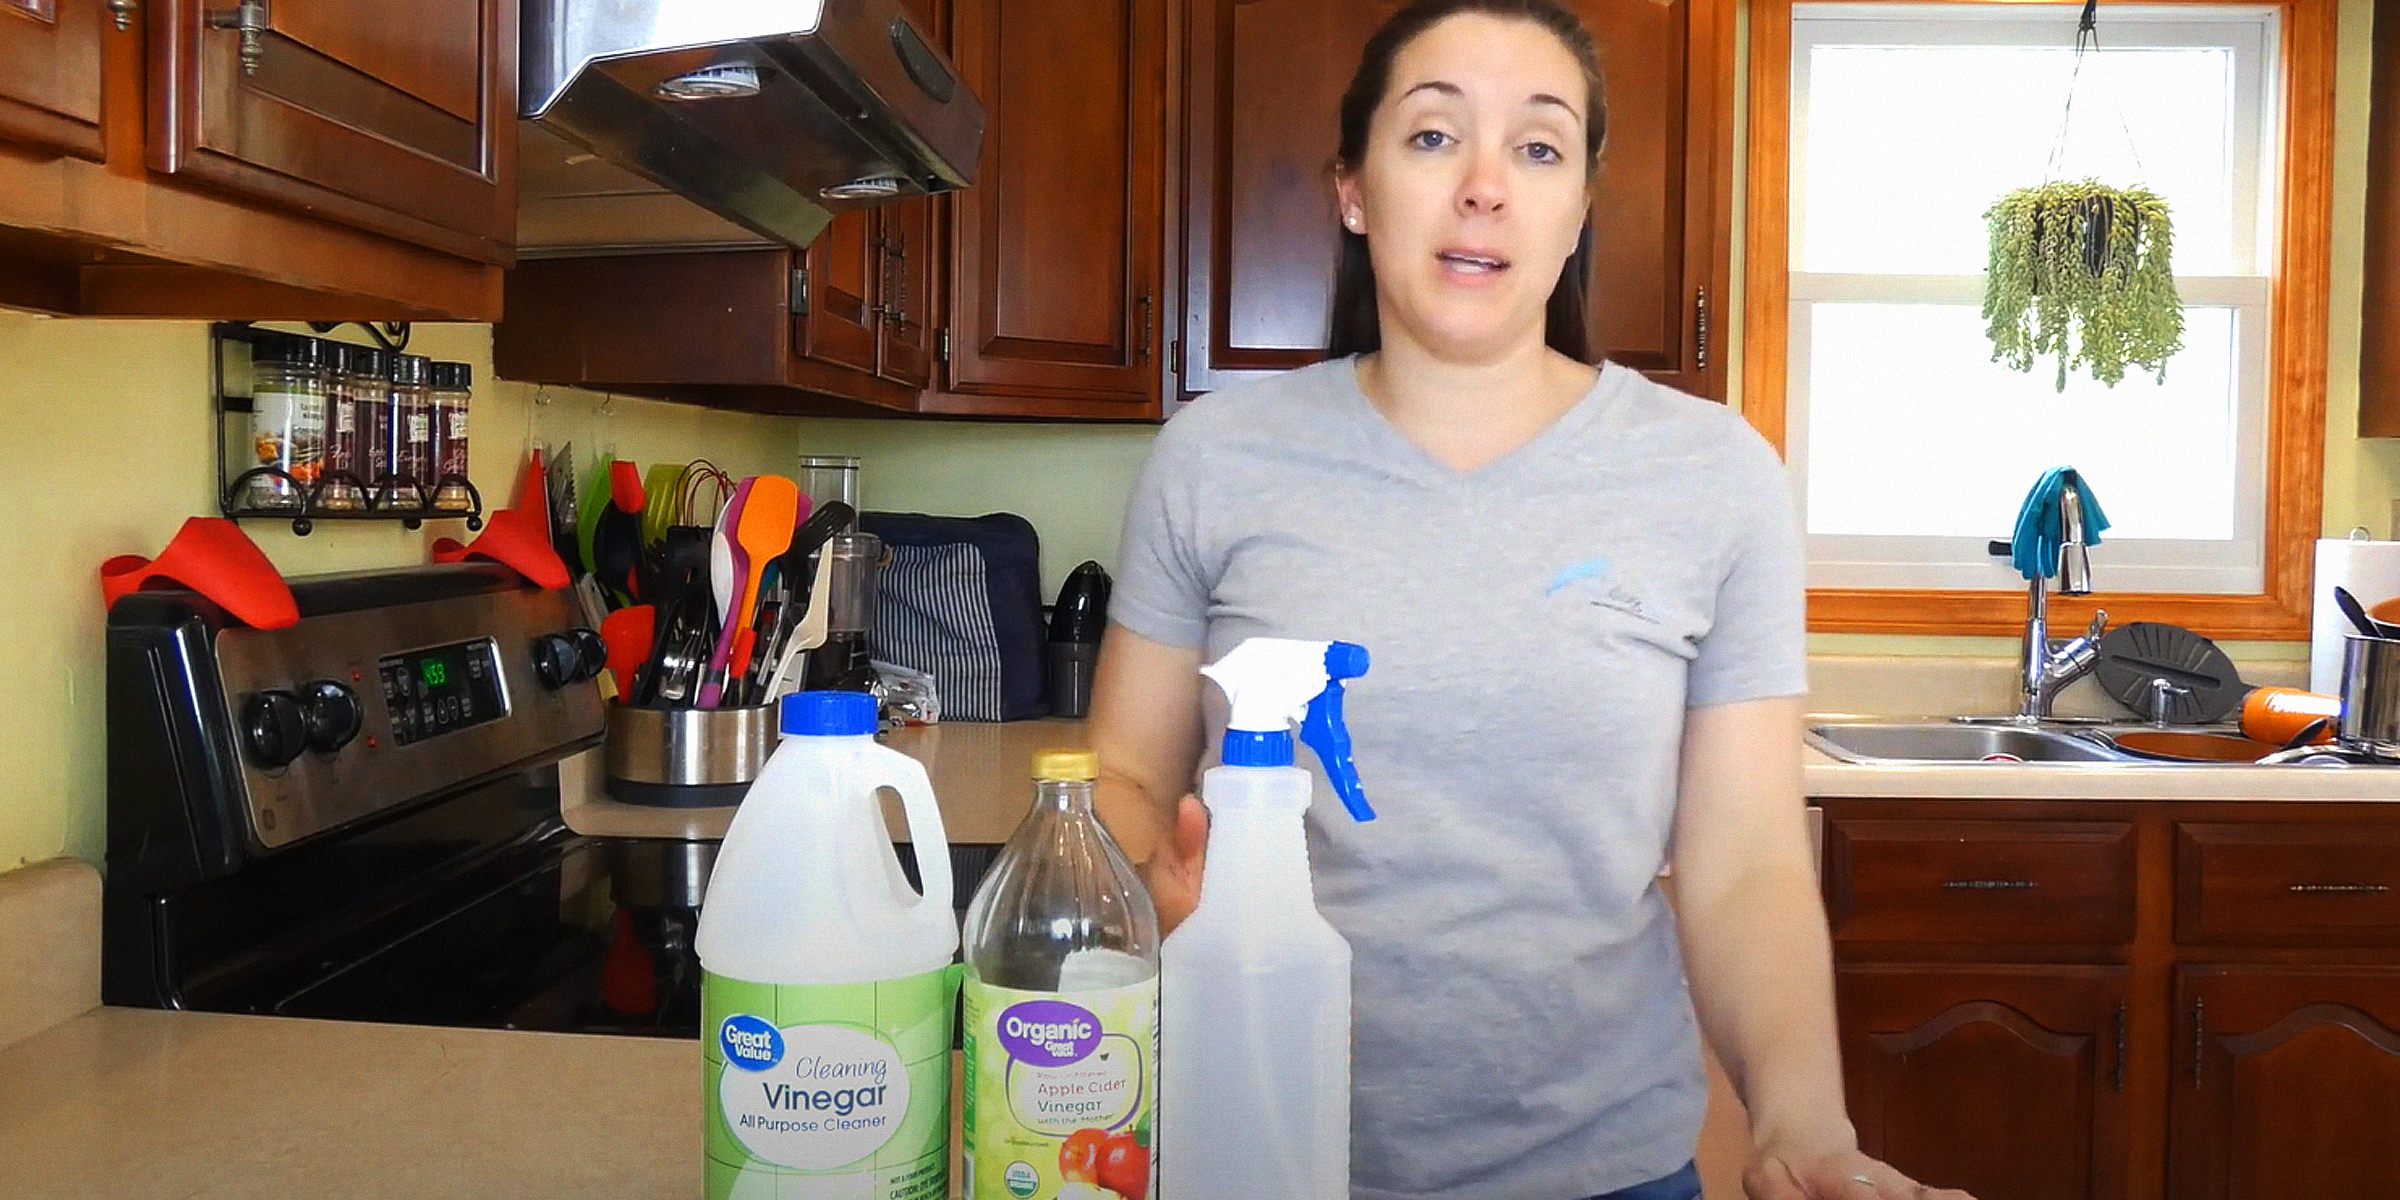 Woman making a DIY bitter spray for dogs | Source: YouTube/@Topdogtips101